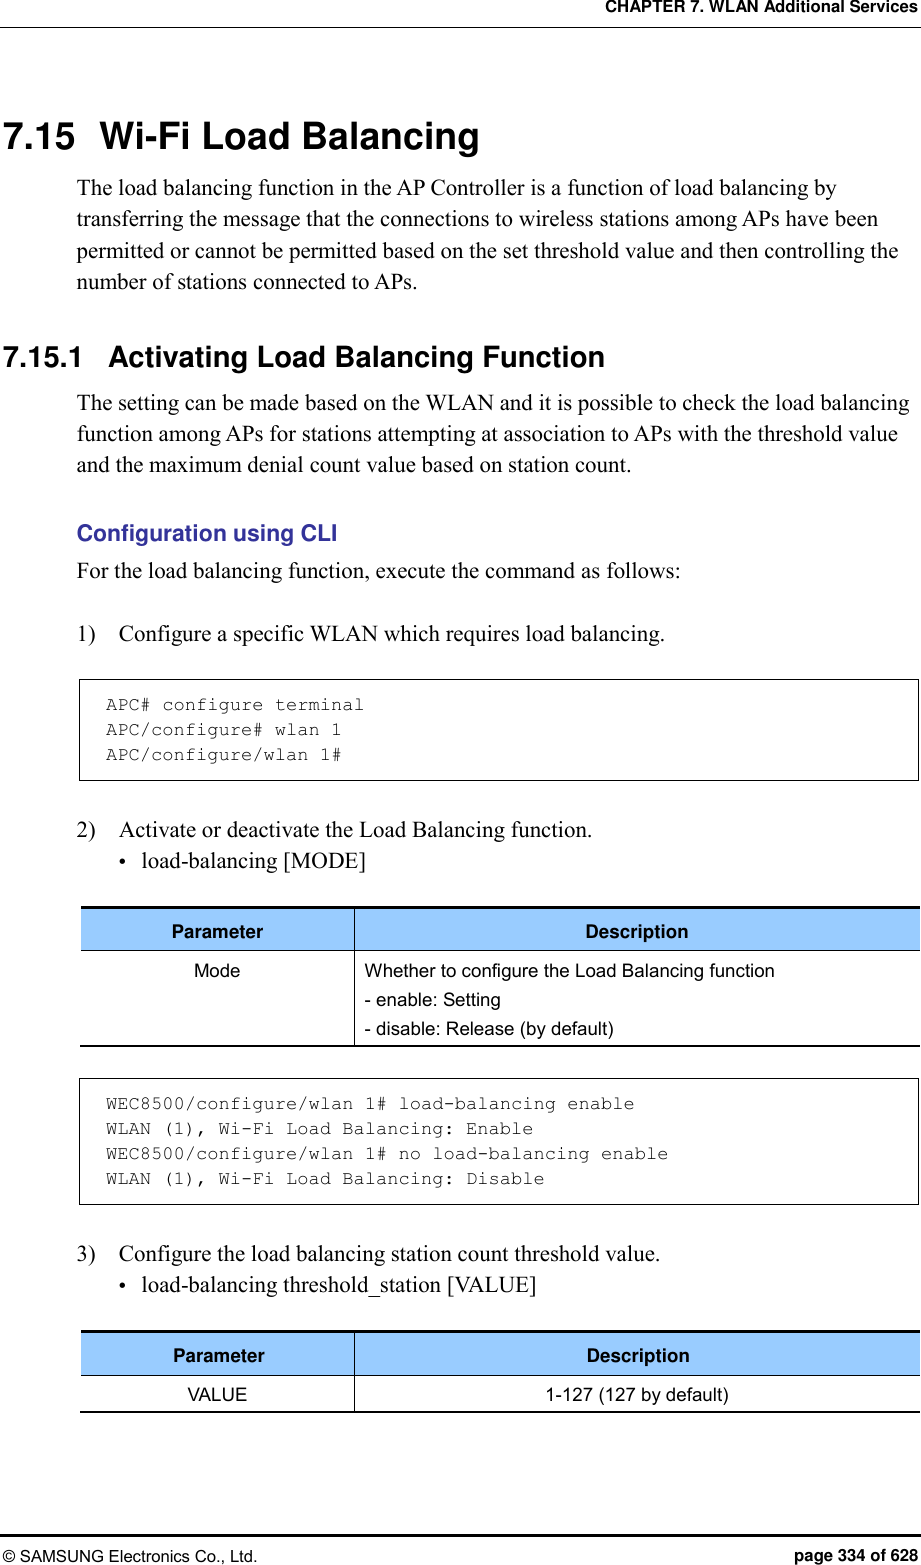 CHAPTER 7. WLAN Additional Services © SAMSUNG Electronics Co., Ltd.  page 334 of 628 7.15  Wi-Fi Load Balancing The load balancing function in the AP Controller is a function of load balancing by transferring the message that the connections to wireless stations among APs have been permitted or cannot be permitted based on the set threshold value and then controlling the number of stations connected to APs.  7.15.1  Activating Load Balancing Function The setting can be made based on the WLAN and it is possible to check the load balancing function among APs for stations attempting at association to APs with the threshold value and the maximum denial count value based on station count.  Configuration using CLI For the load balancing function, execute the command as follows:  1)    Configure a specific WLAN which requires load balancing.  APC# configure terminal APC/configure# wlan 1 APC/configure/wlan 1#  2)    Activate or deactivate the Load Balancing function.  load-balancing [MODE]  Parameter Description Mode Whether to configure the Load Balancing function - enable: Setting - disable: Release (by default)  WEC8500/configure/wlan 1# load-balancing enable WLAN (1), Wi-Fi Load Balancing: Enable WEC8500/configure/wlan 1# no load-balancing enable WLAN (1), Wi-Fi Load Balancing: Disable  3)    Configure the load balancing station count threshold value.  load-balancing threshold_station [VALUE]  Parameter Description VALUE 1-127 (127 by default)  